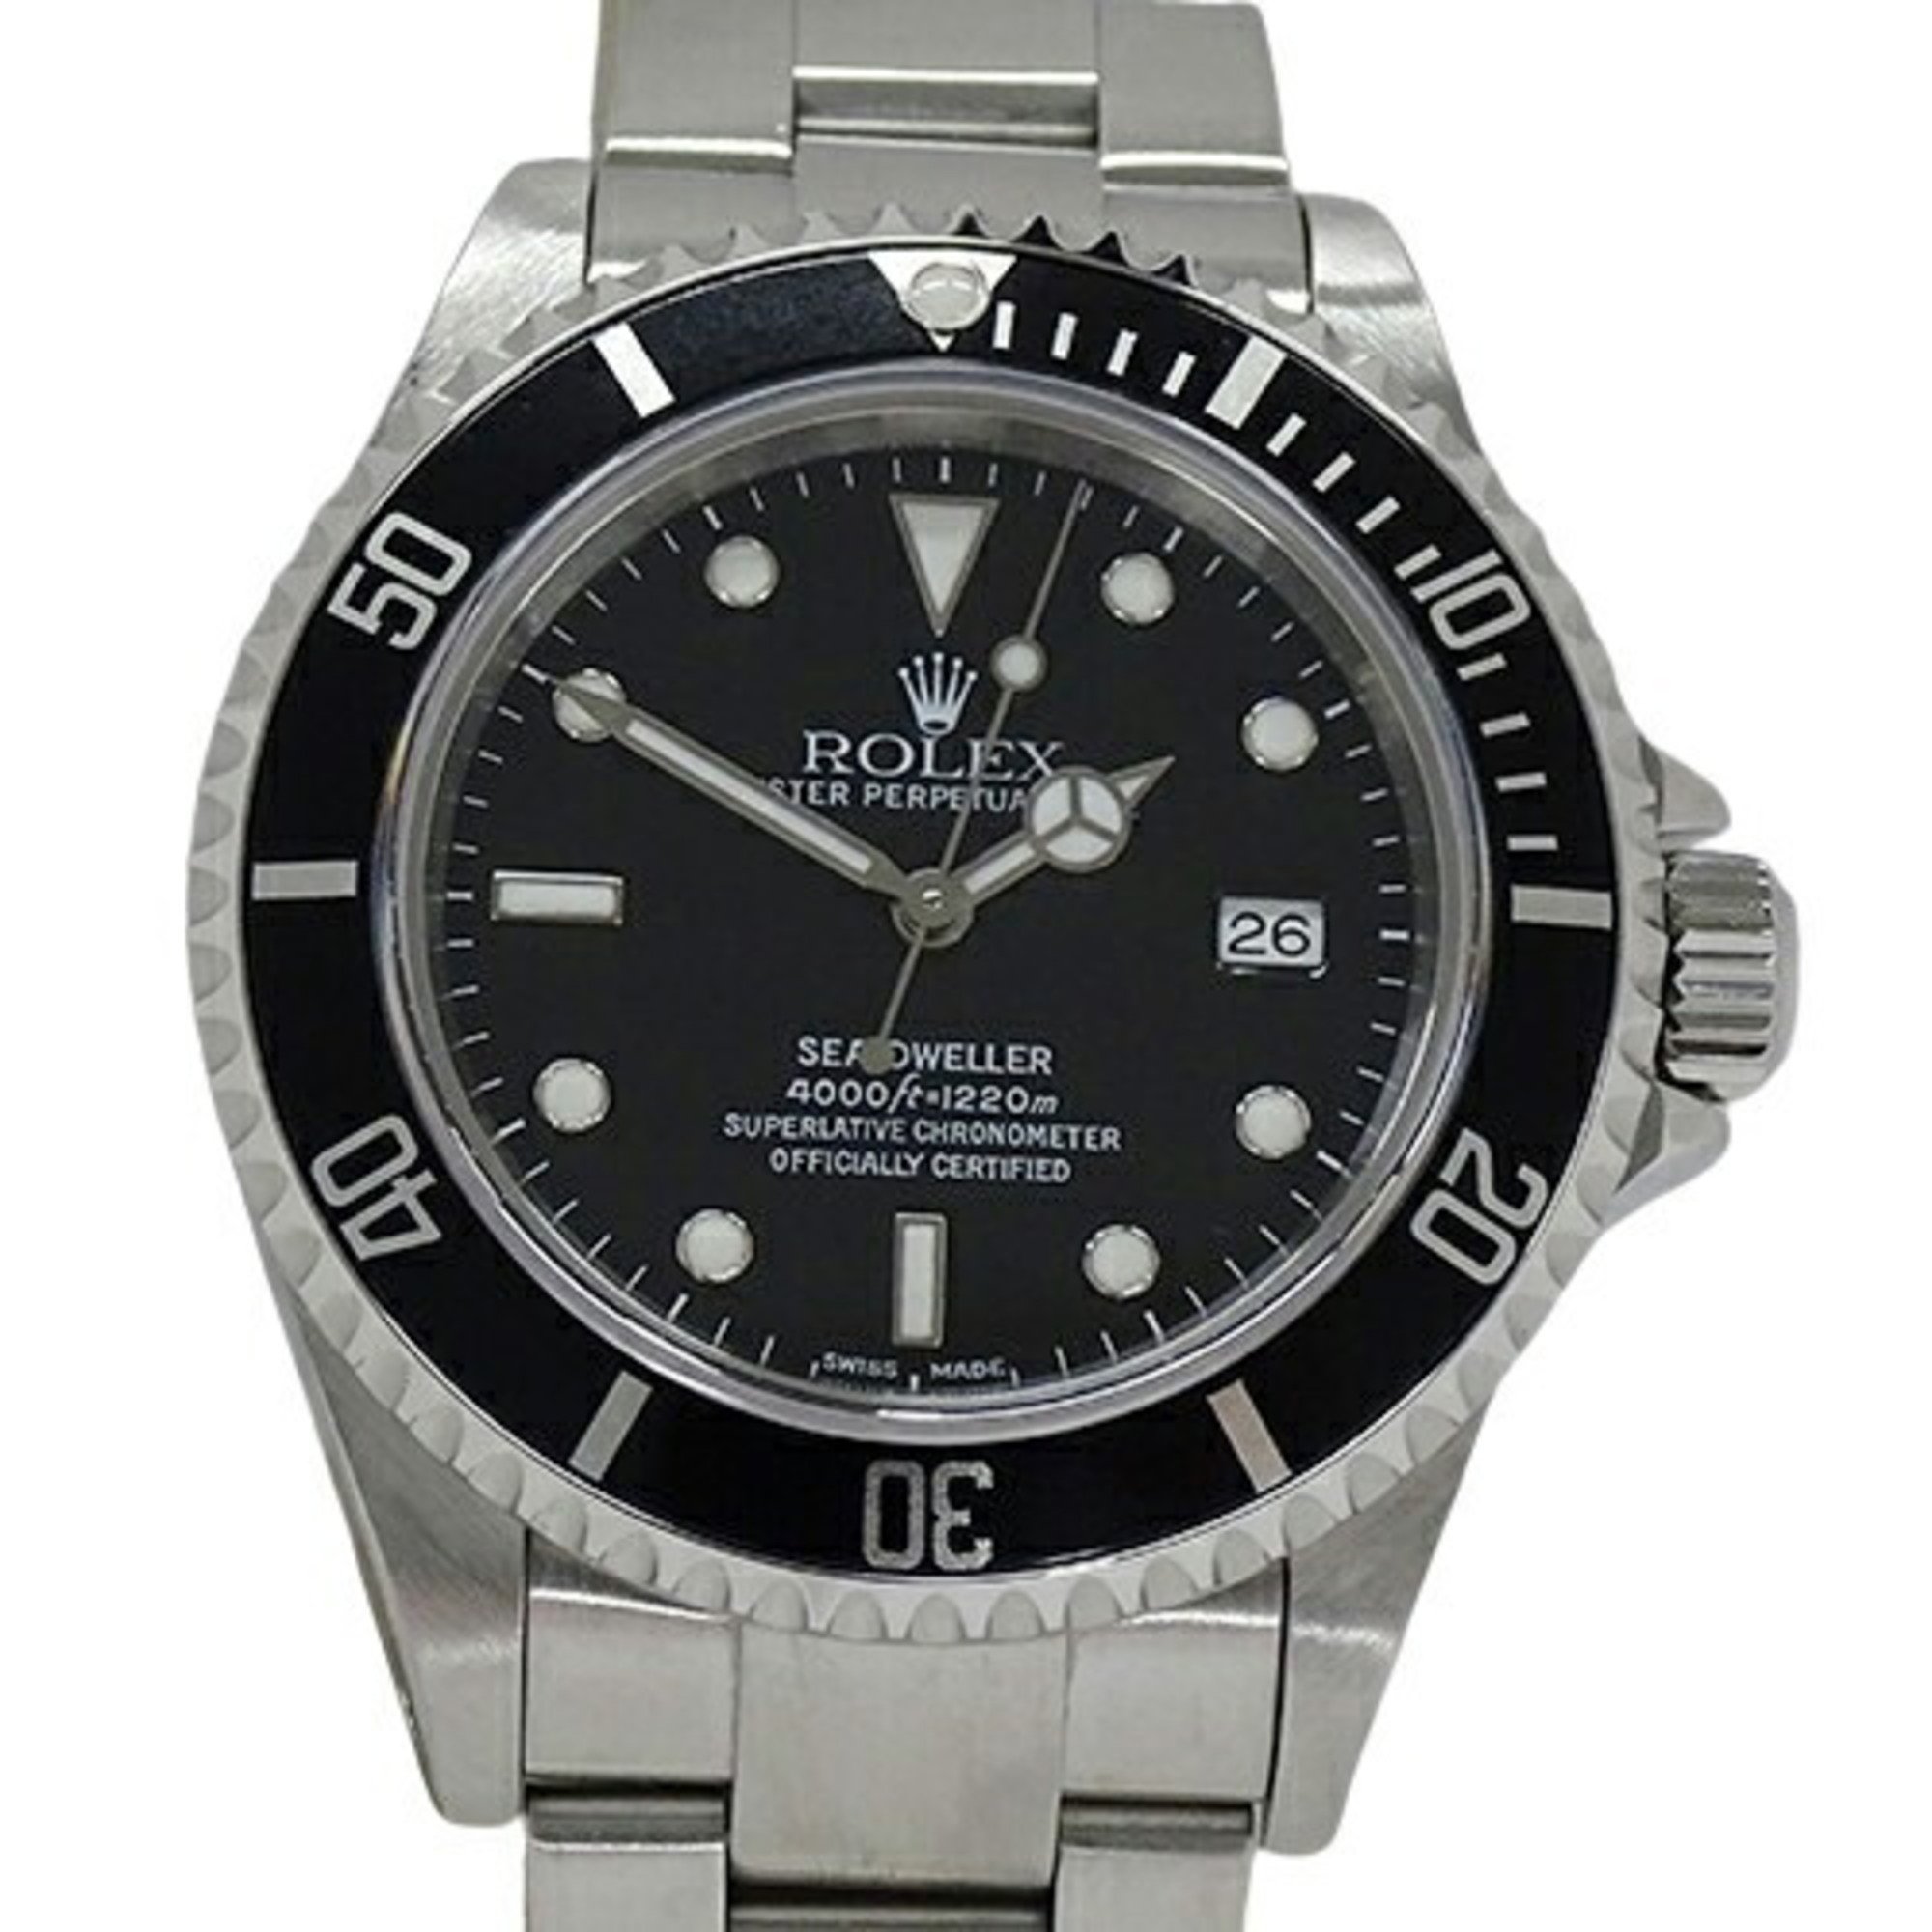 Rolex ROLEX Sea-Dweller 16600 K series Men's watch Date Automatic AT Stainless steel SS Silver Black Polished